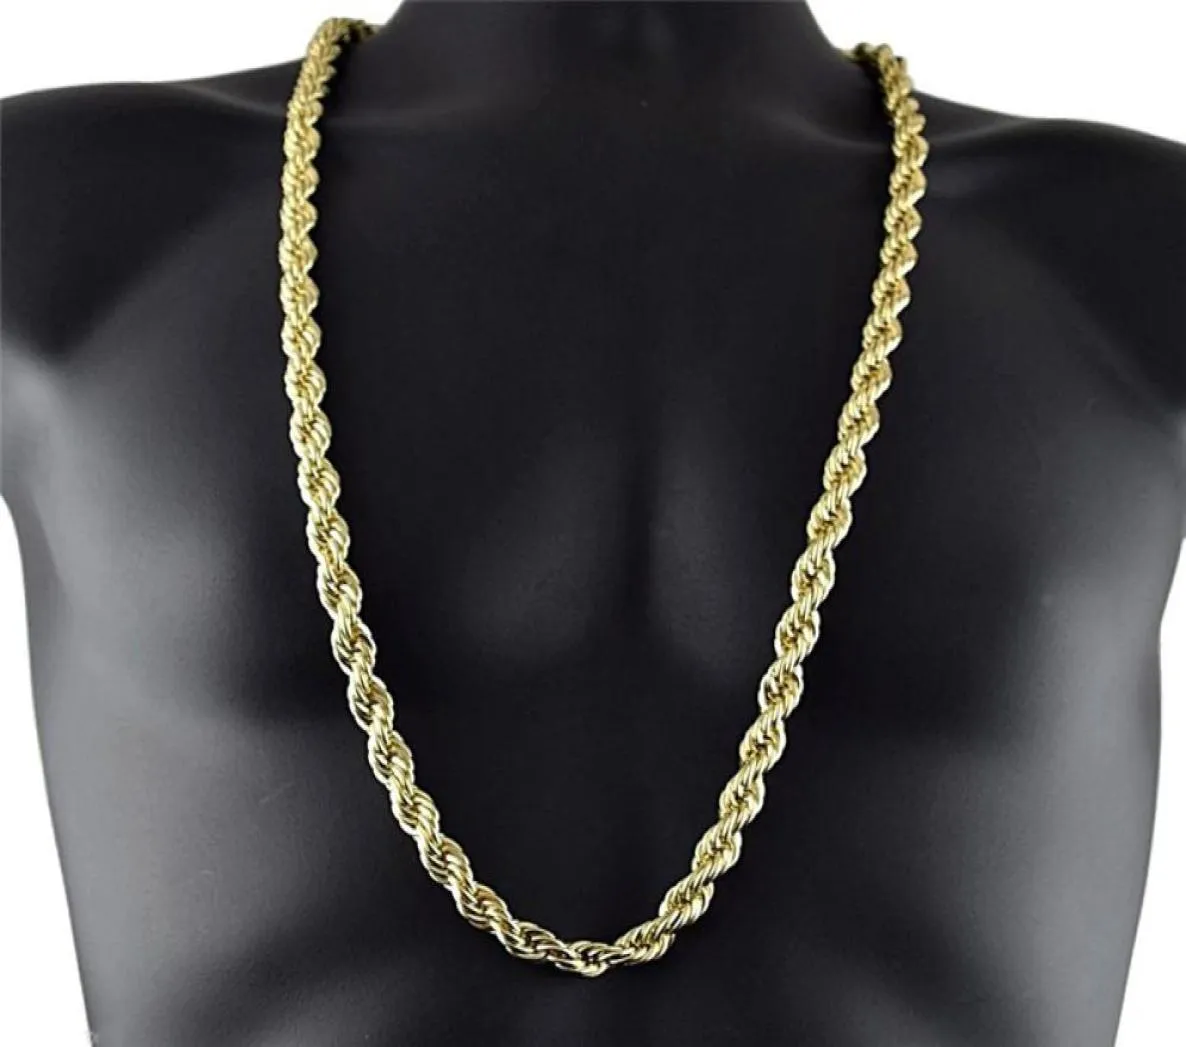 10mm Thick 90cm Long Rope ed Chain 24K Gold Plated Hip hop ed Heavy Necklace For mens8428126